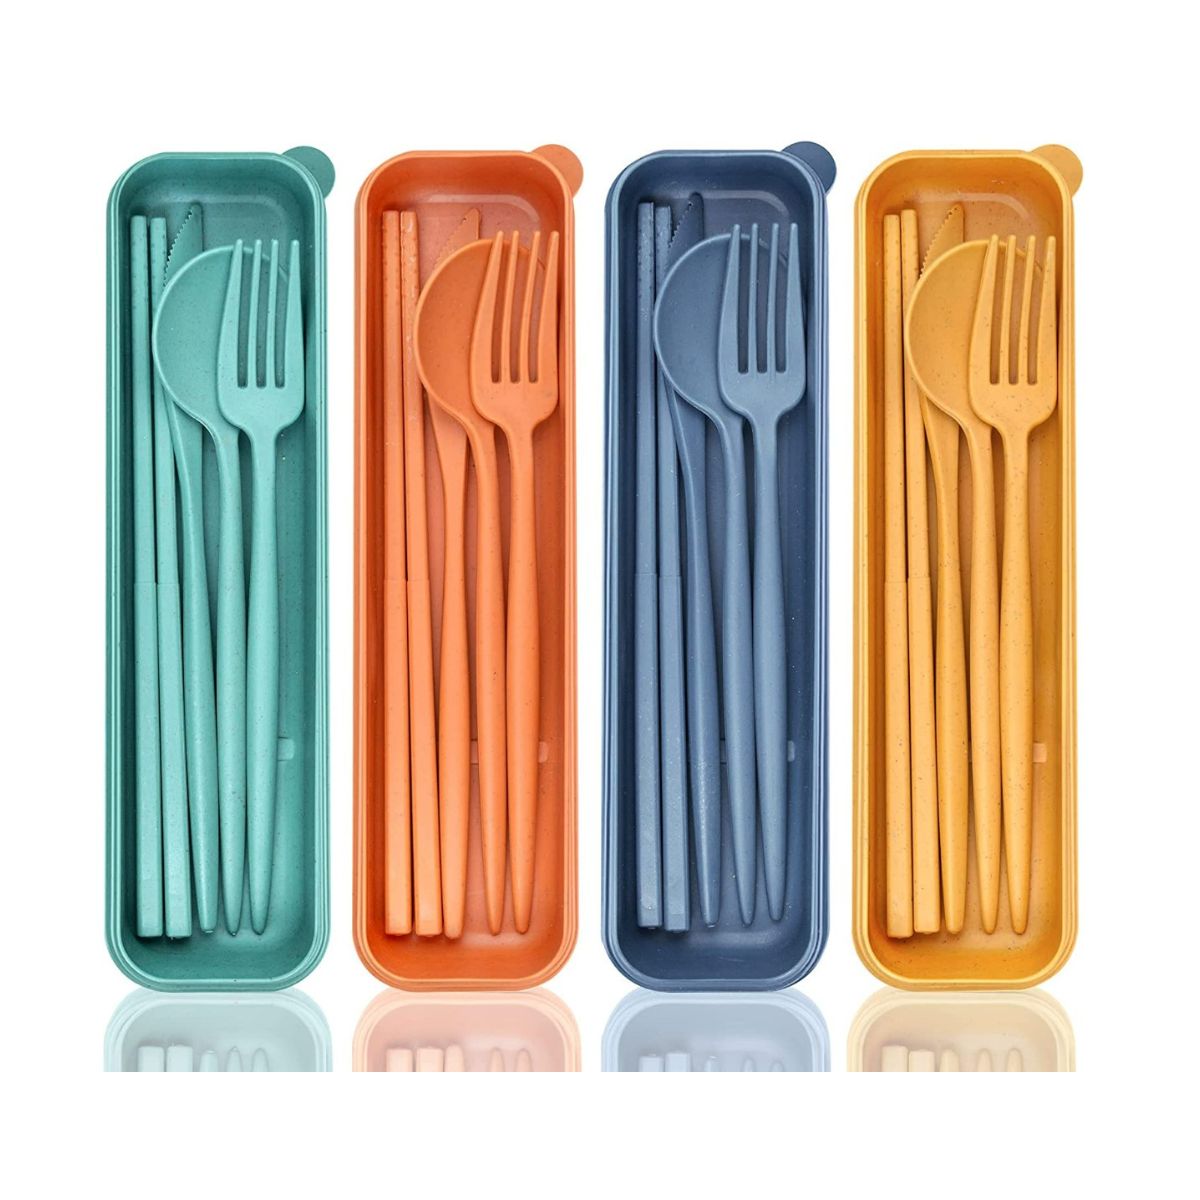 Four sets of wheat utensils in muted colors